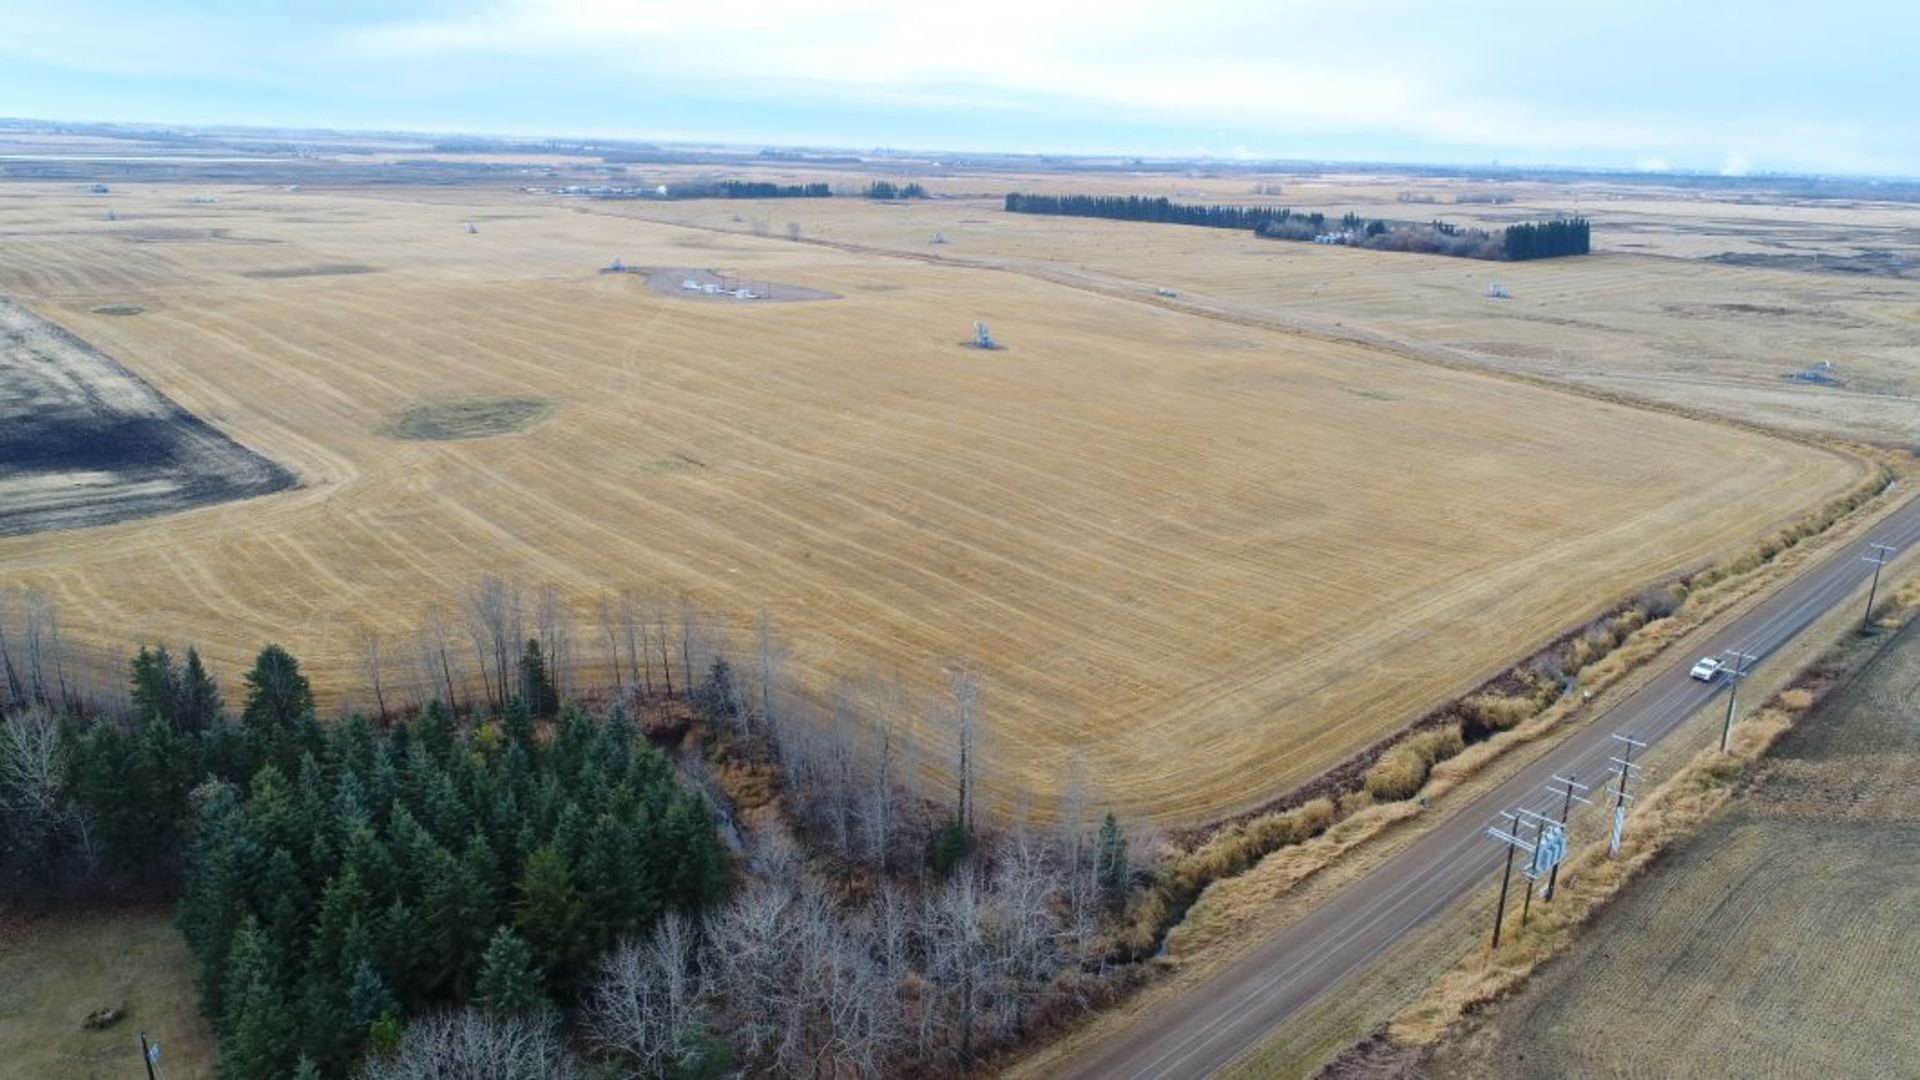 160+/- Total Acres NW 8-56-20-W4, Bruderheim, AB, consisting of Crop Land, Surface Lease & Yard Site - Image 19 of 34